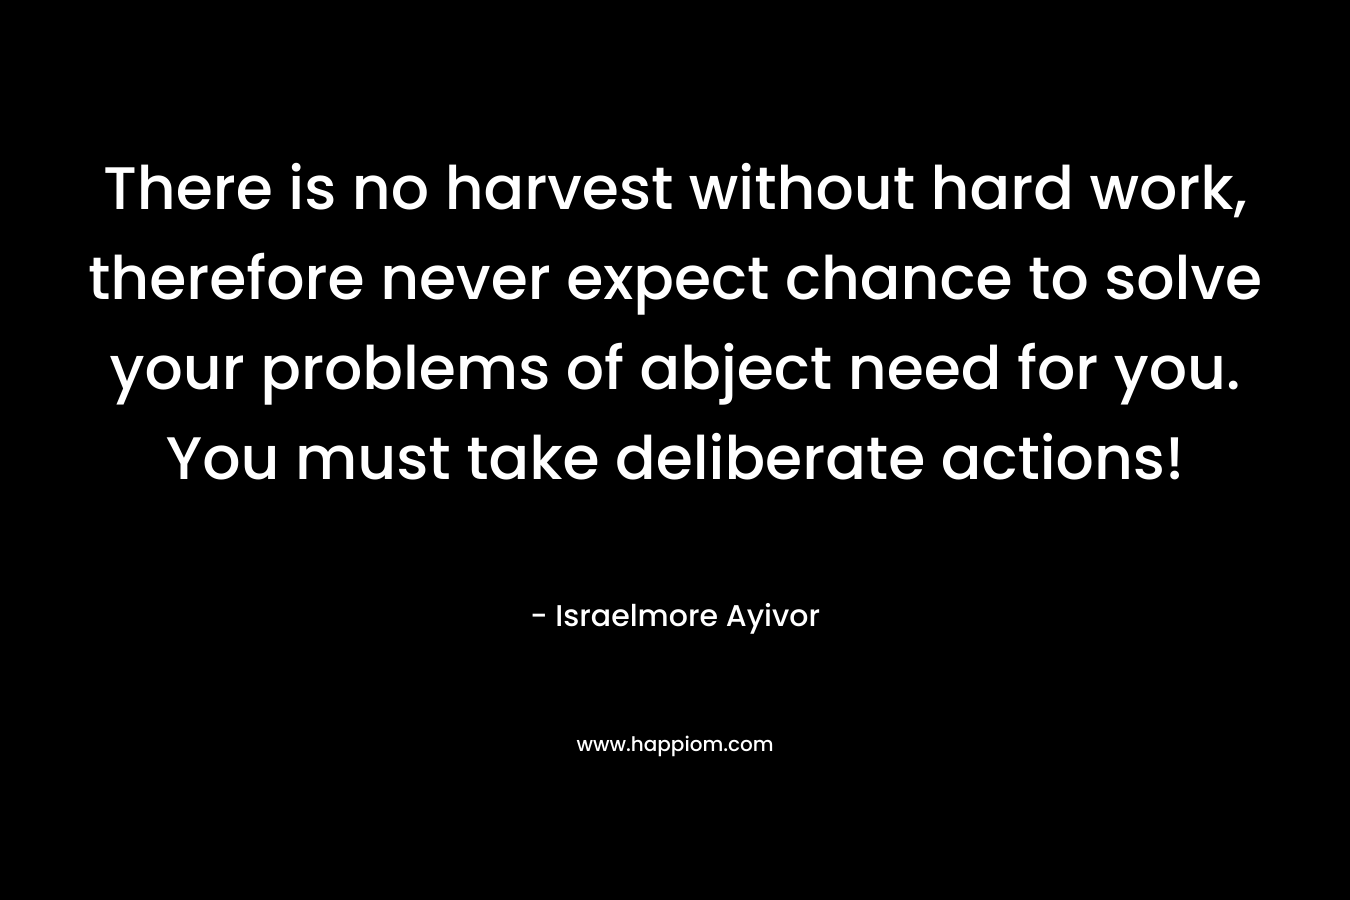 There is no harvest without hard work, therefore never expect chance to solve your problems of abject need for you. You must take deliberate actions! – Israelmore Ayivor